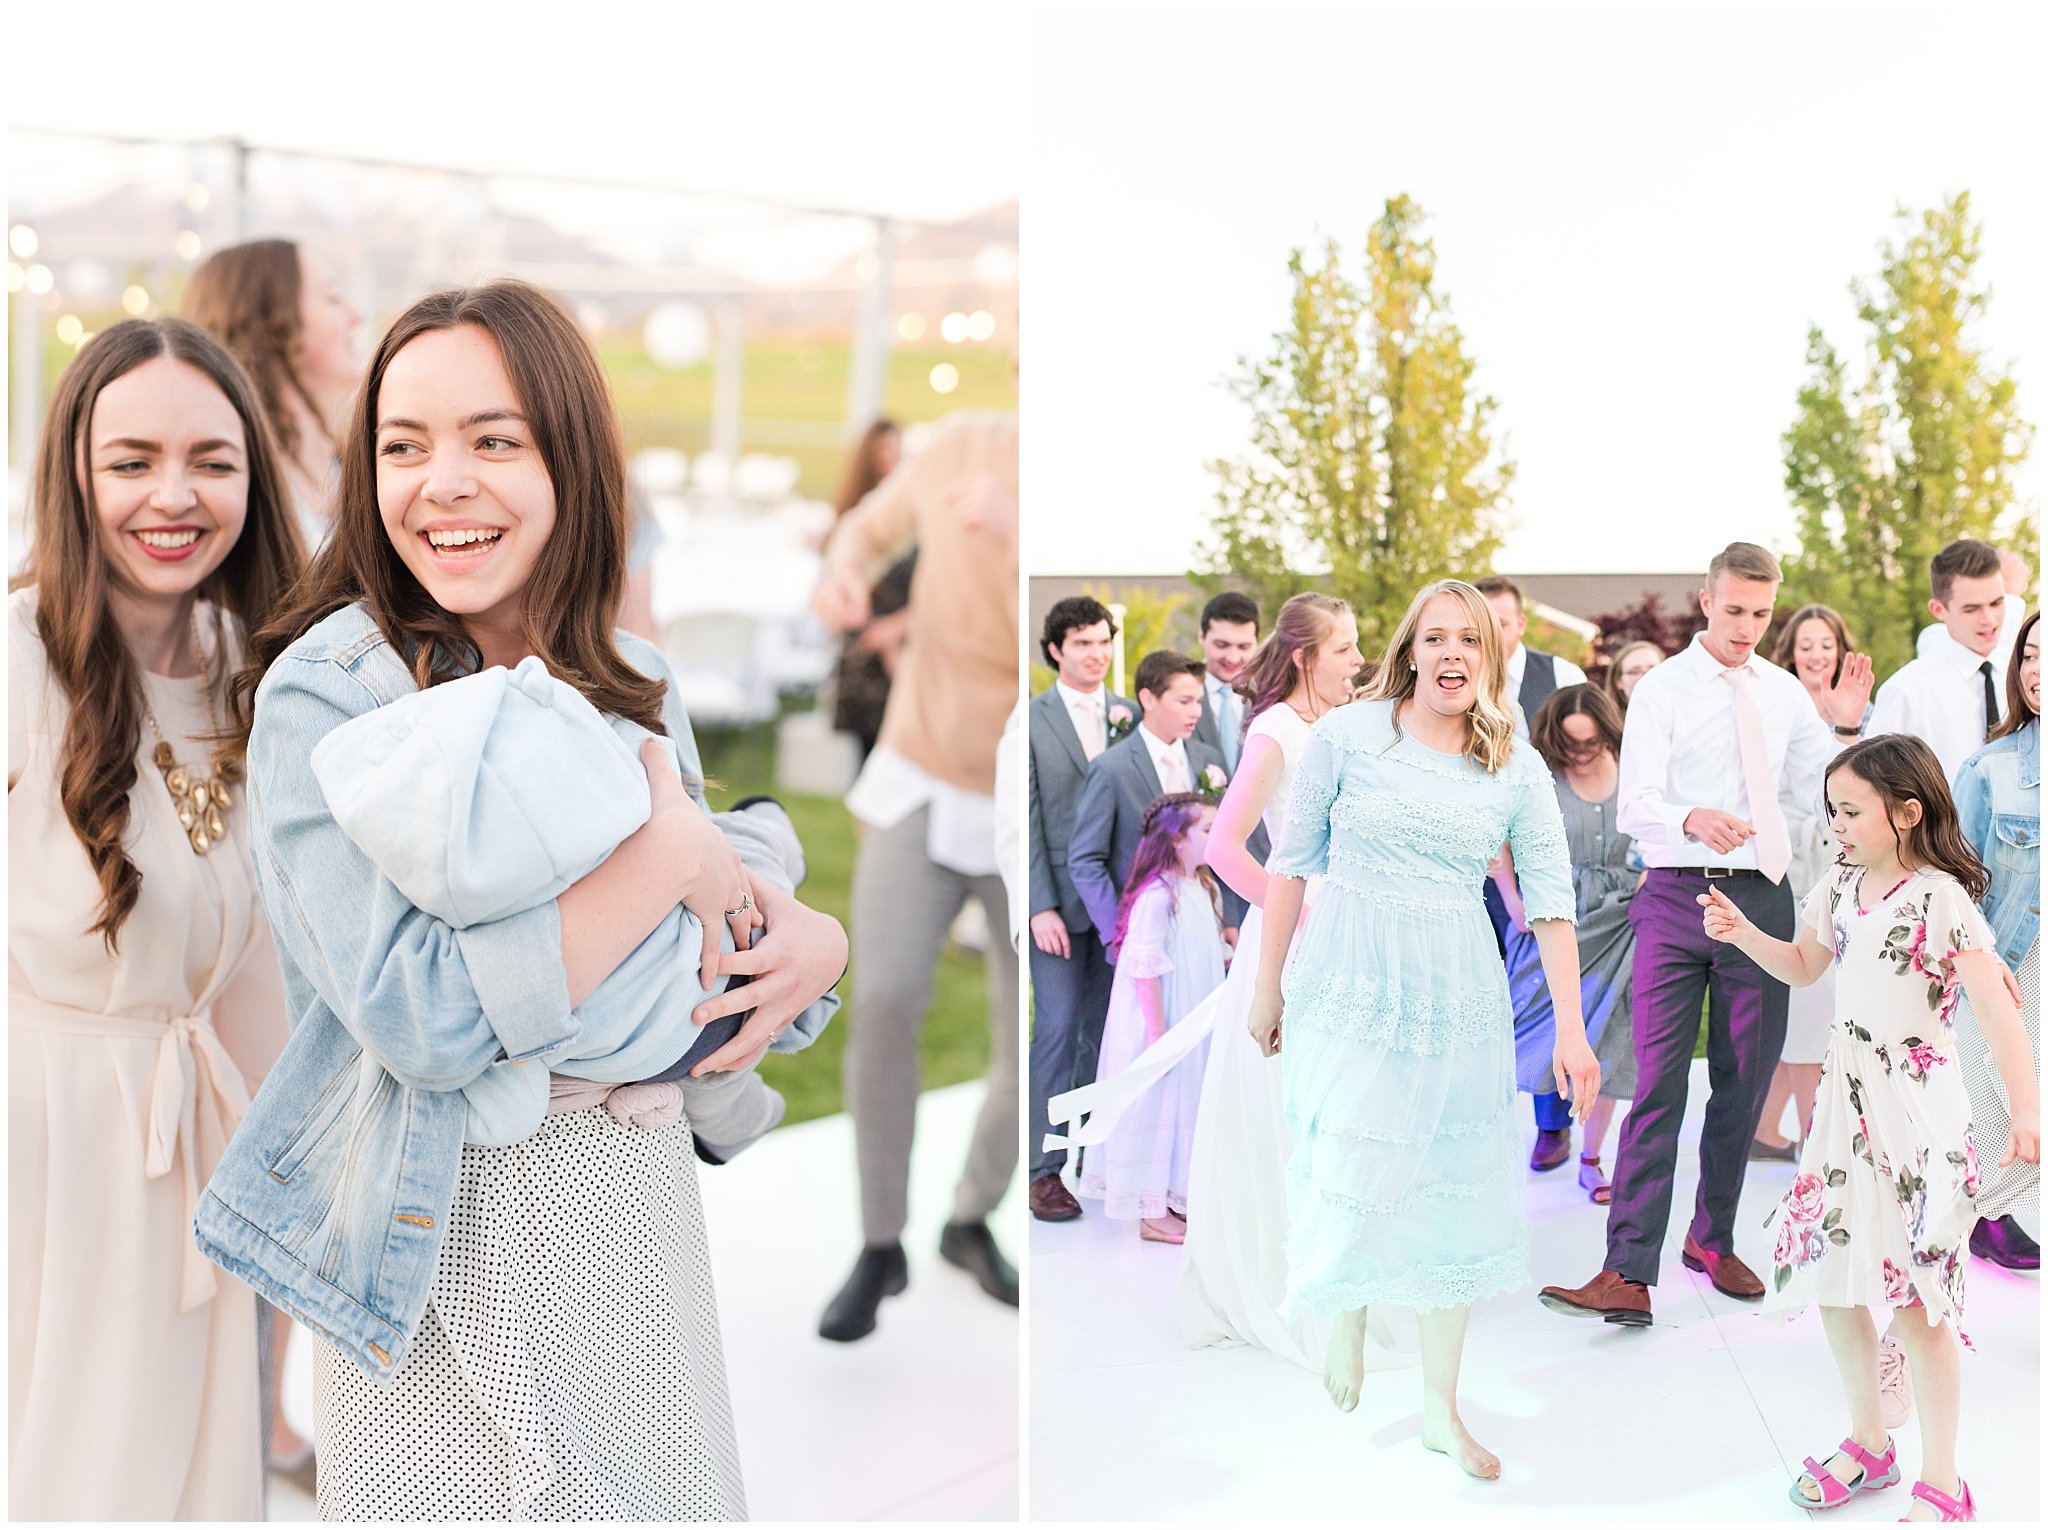 Fun backyard party dancing | Backyard outdoor spring wedding with grey, blush, and light blue wedding colors | Spring Provo City Center Temple Wedding | Utah Wedding Photographers | Jessie and Dallin Photography